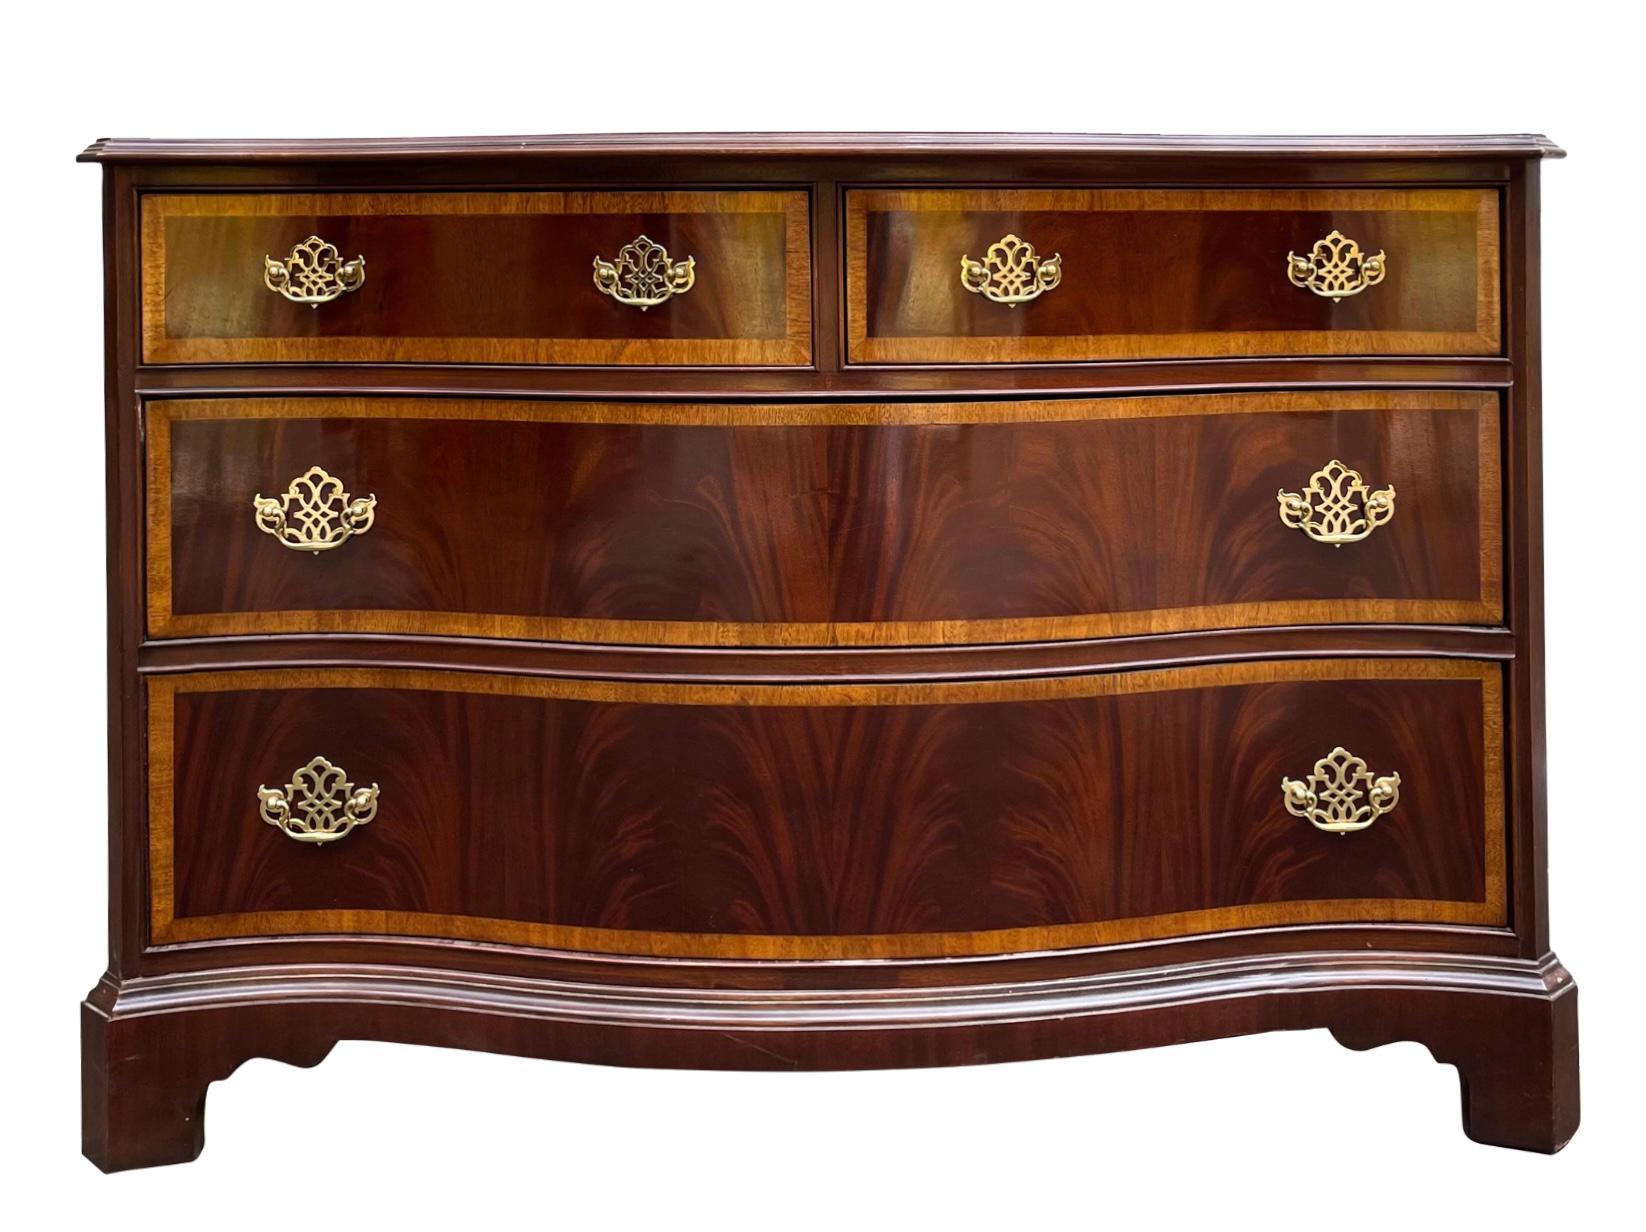 Chinese Chippendale Hickory Furniture Chippendale Style Flame Mahogany Serpentine Chest - Pair For Sale